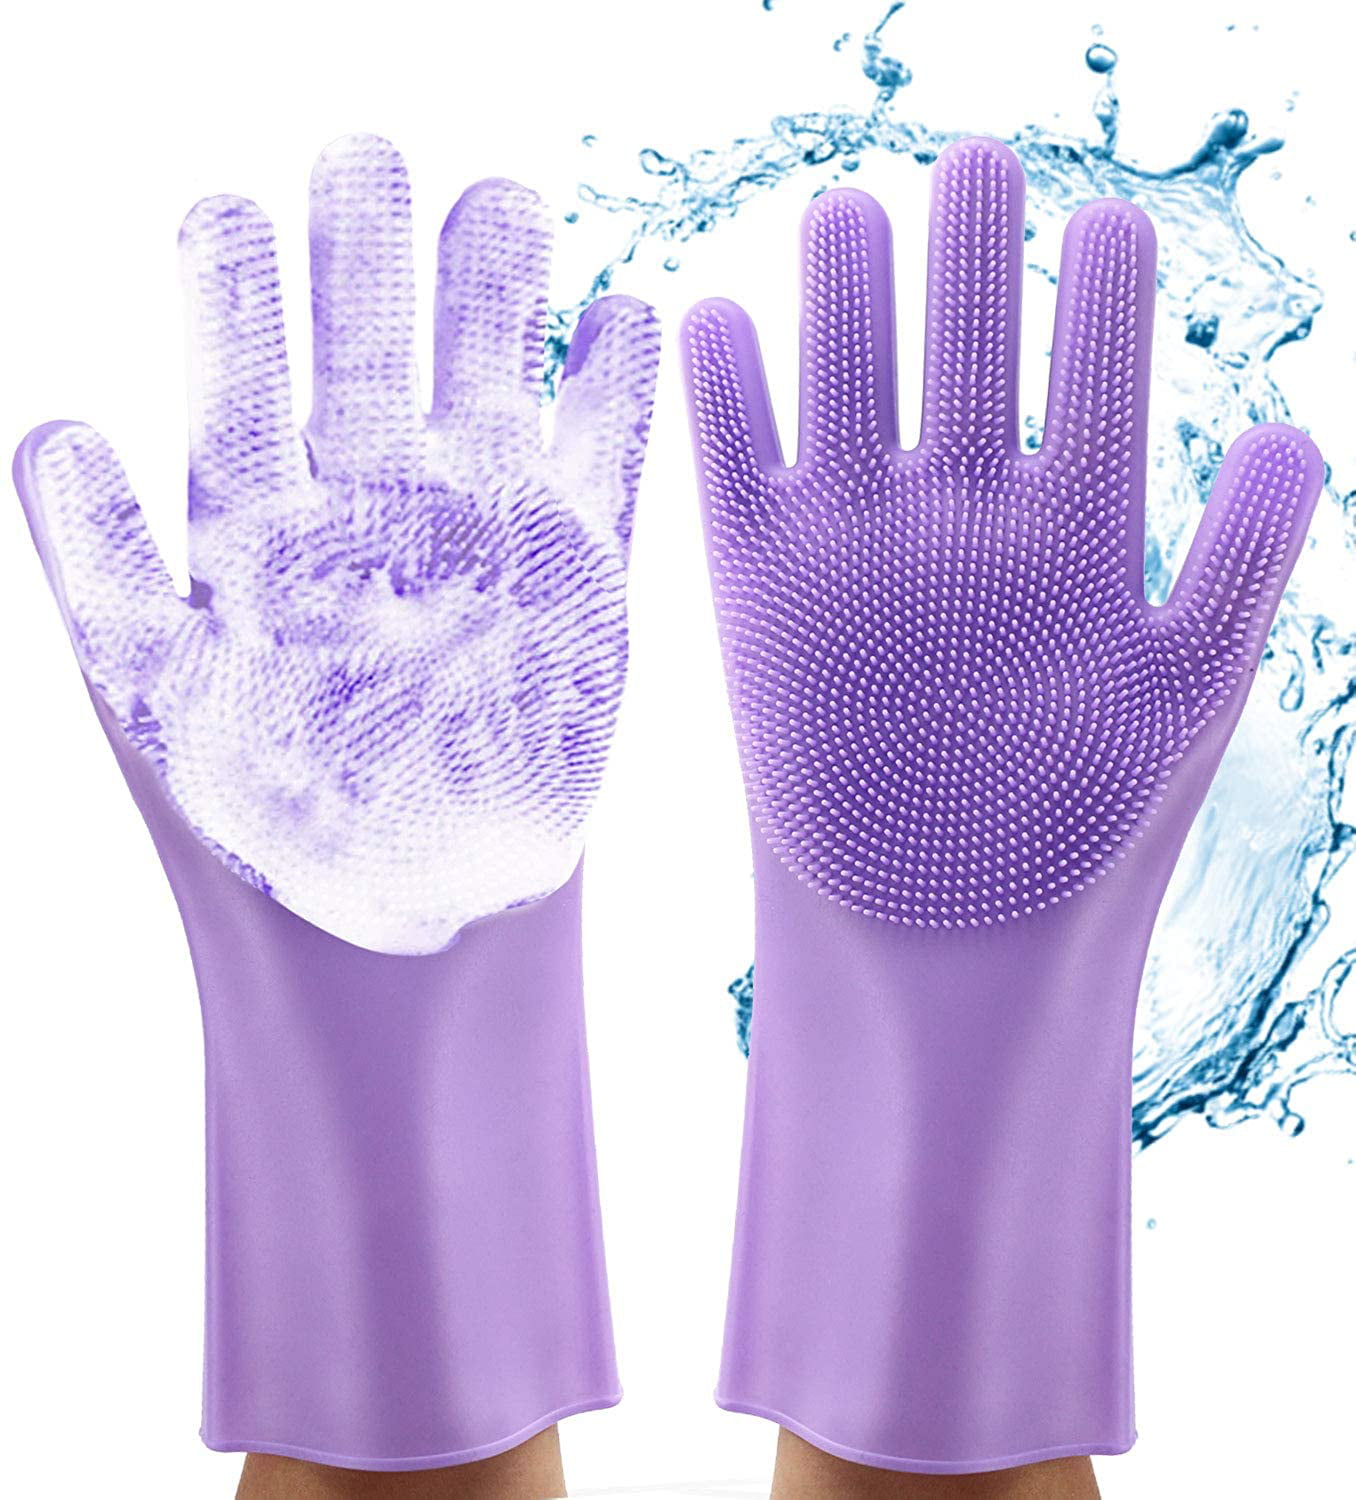 Anzoee Reusable Silicone Dishwashing Gloves Pair Of Rubber Scrubbing Gloves 